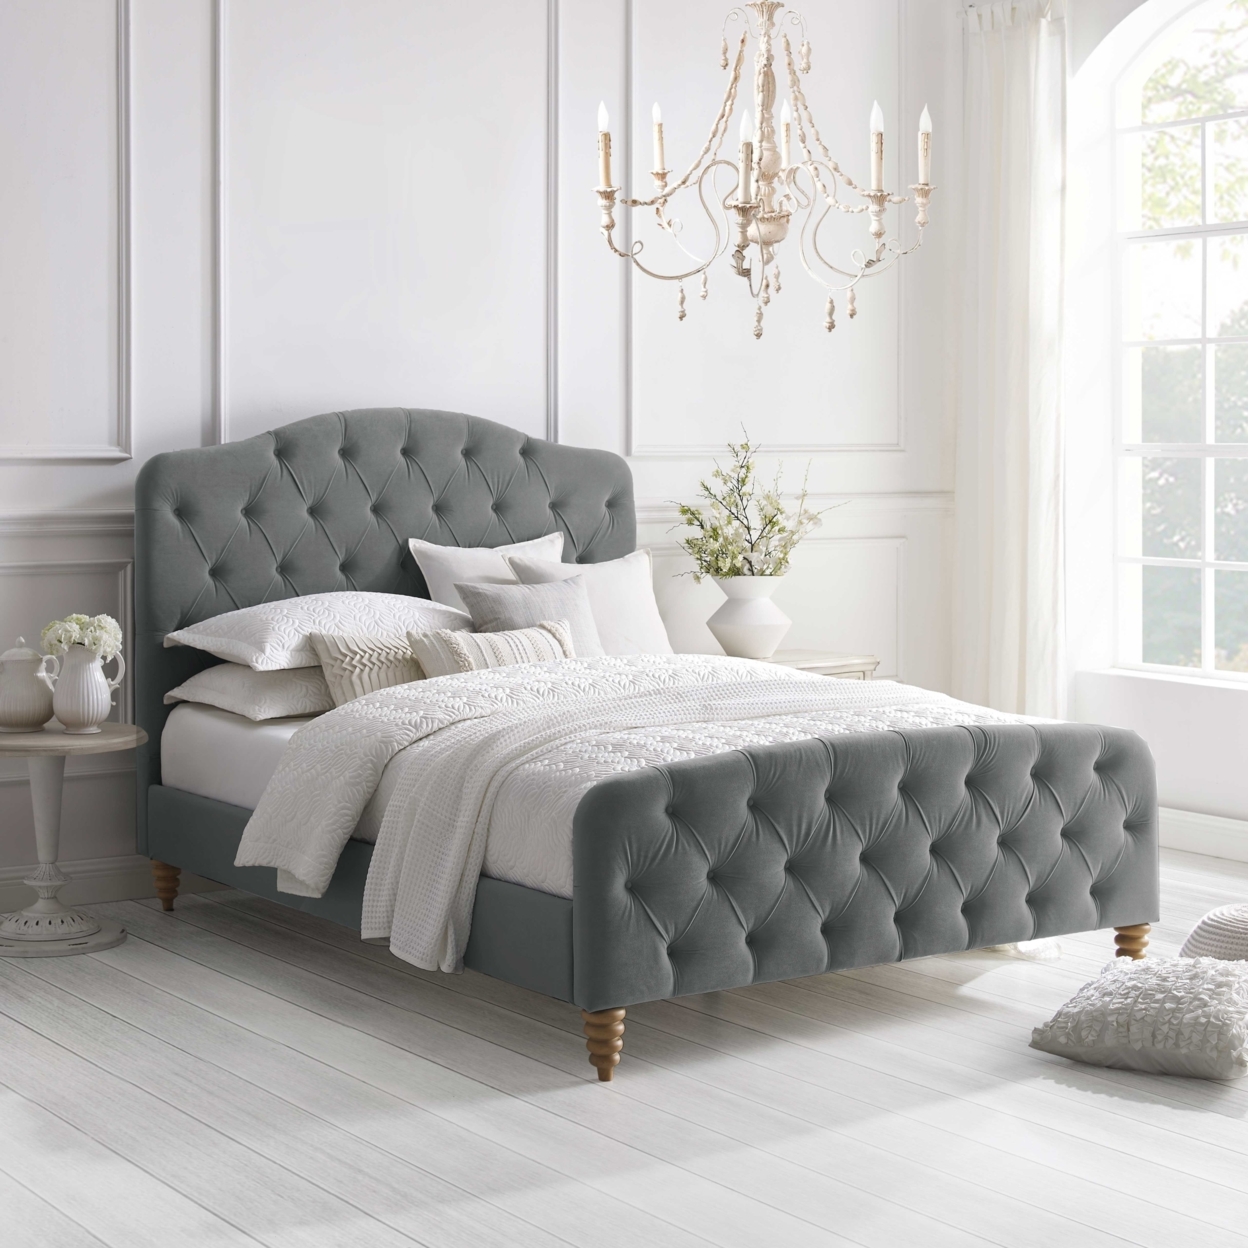 Adilene Bed-Diamond Tufted Headboard And Footboard-Upholstered-Slats Included - Blush, Queen